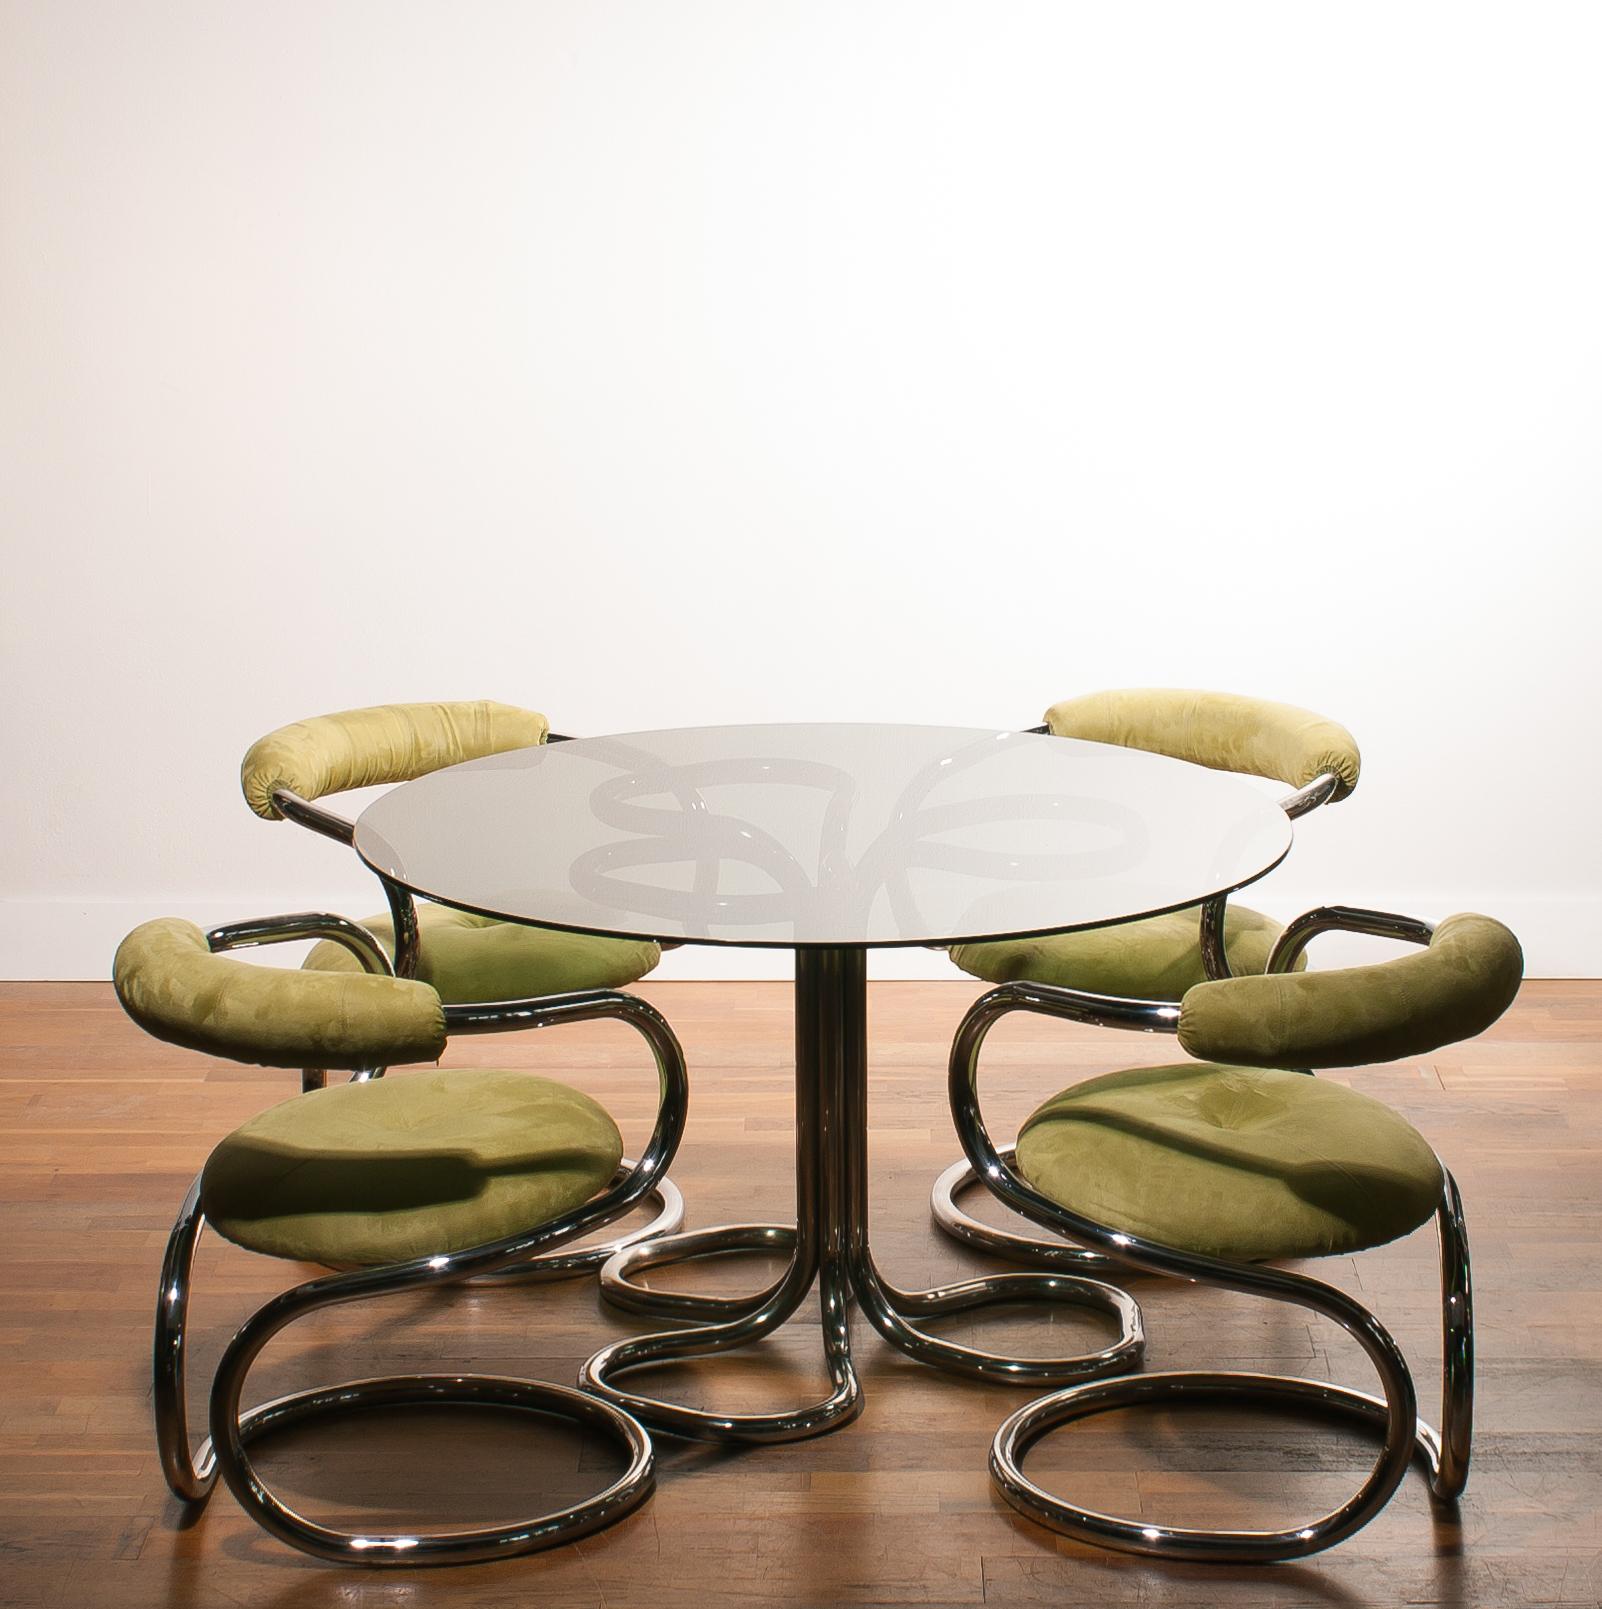 A beautiful set dining chairs designed and produced by Tecnosalotto in Italy.
The chairs have a chromed base with a yellow-lime faux suede upholstery.
They are in very nice condition,
circa 1970s.
Dimensions: Chairs H 73 cm, W 59 cm, D 60 cm, SH